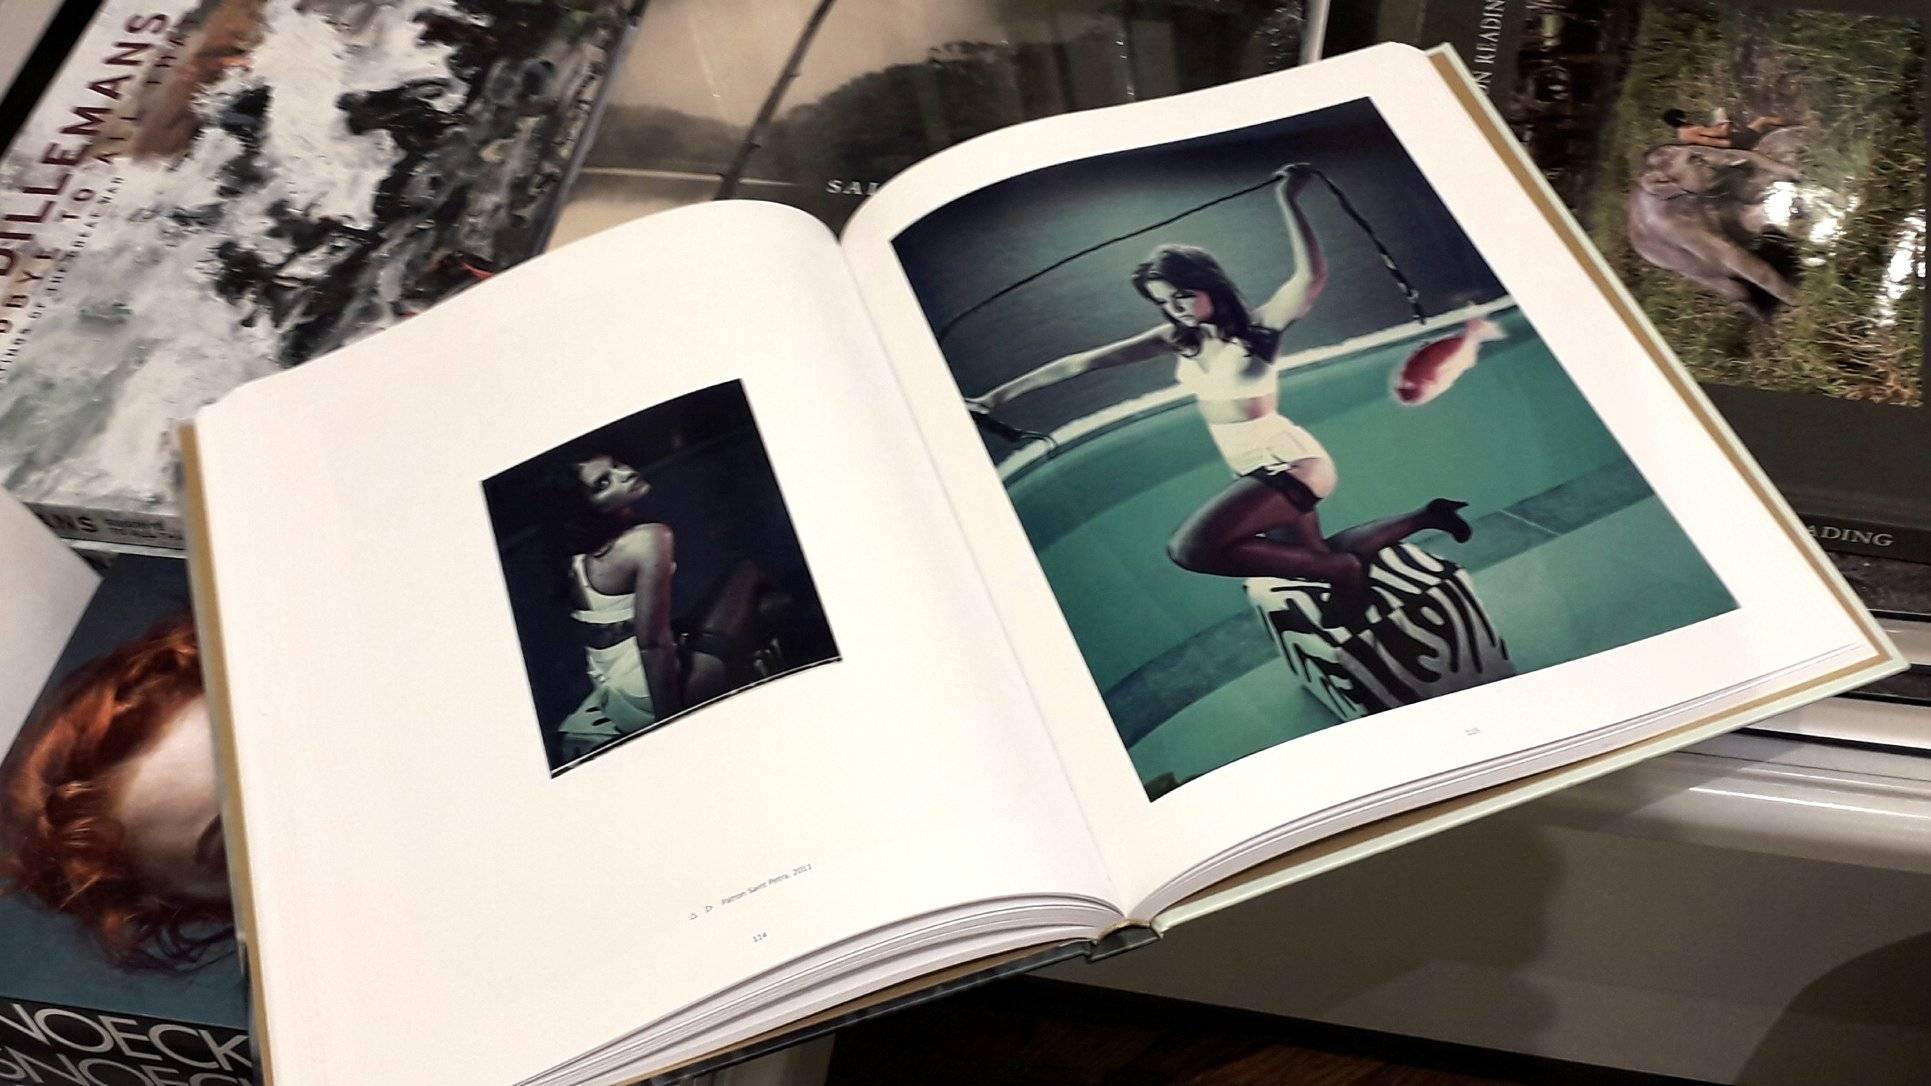 'The Eyes of the Fox' book signed including 'Camisole', Edition of 3 - Beige Color Photograph by Carmen de Vos